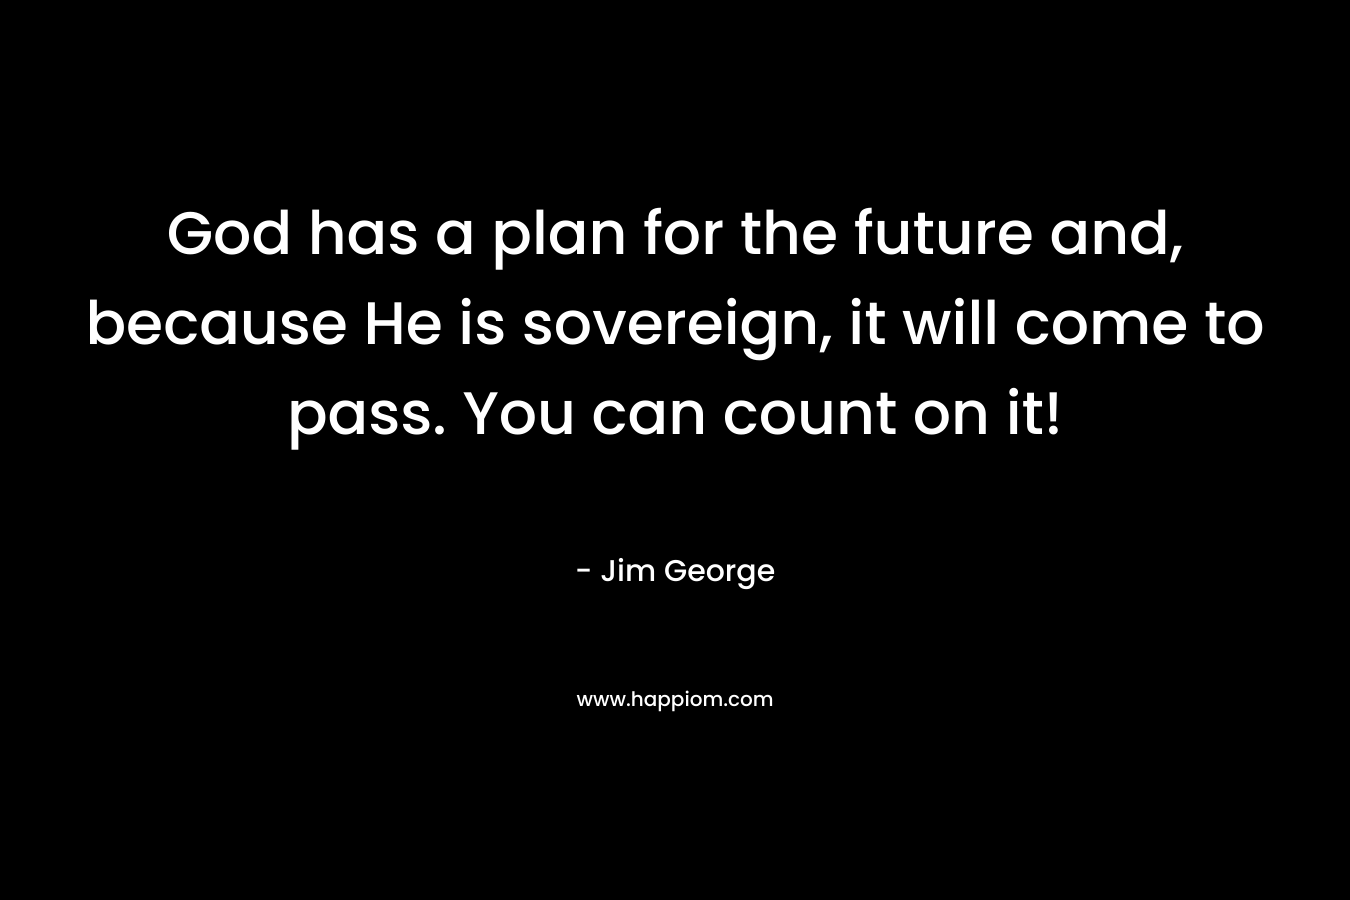 God has a plan for the future and, because He is sovereign, it will come to pass. You can count on it! – Jim George